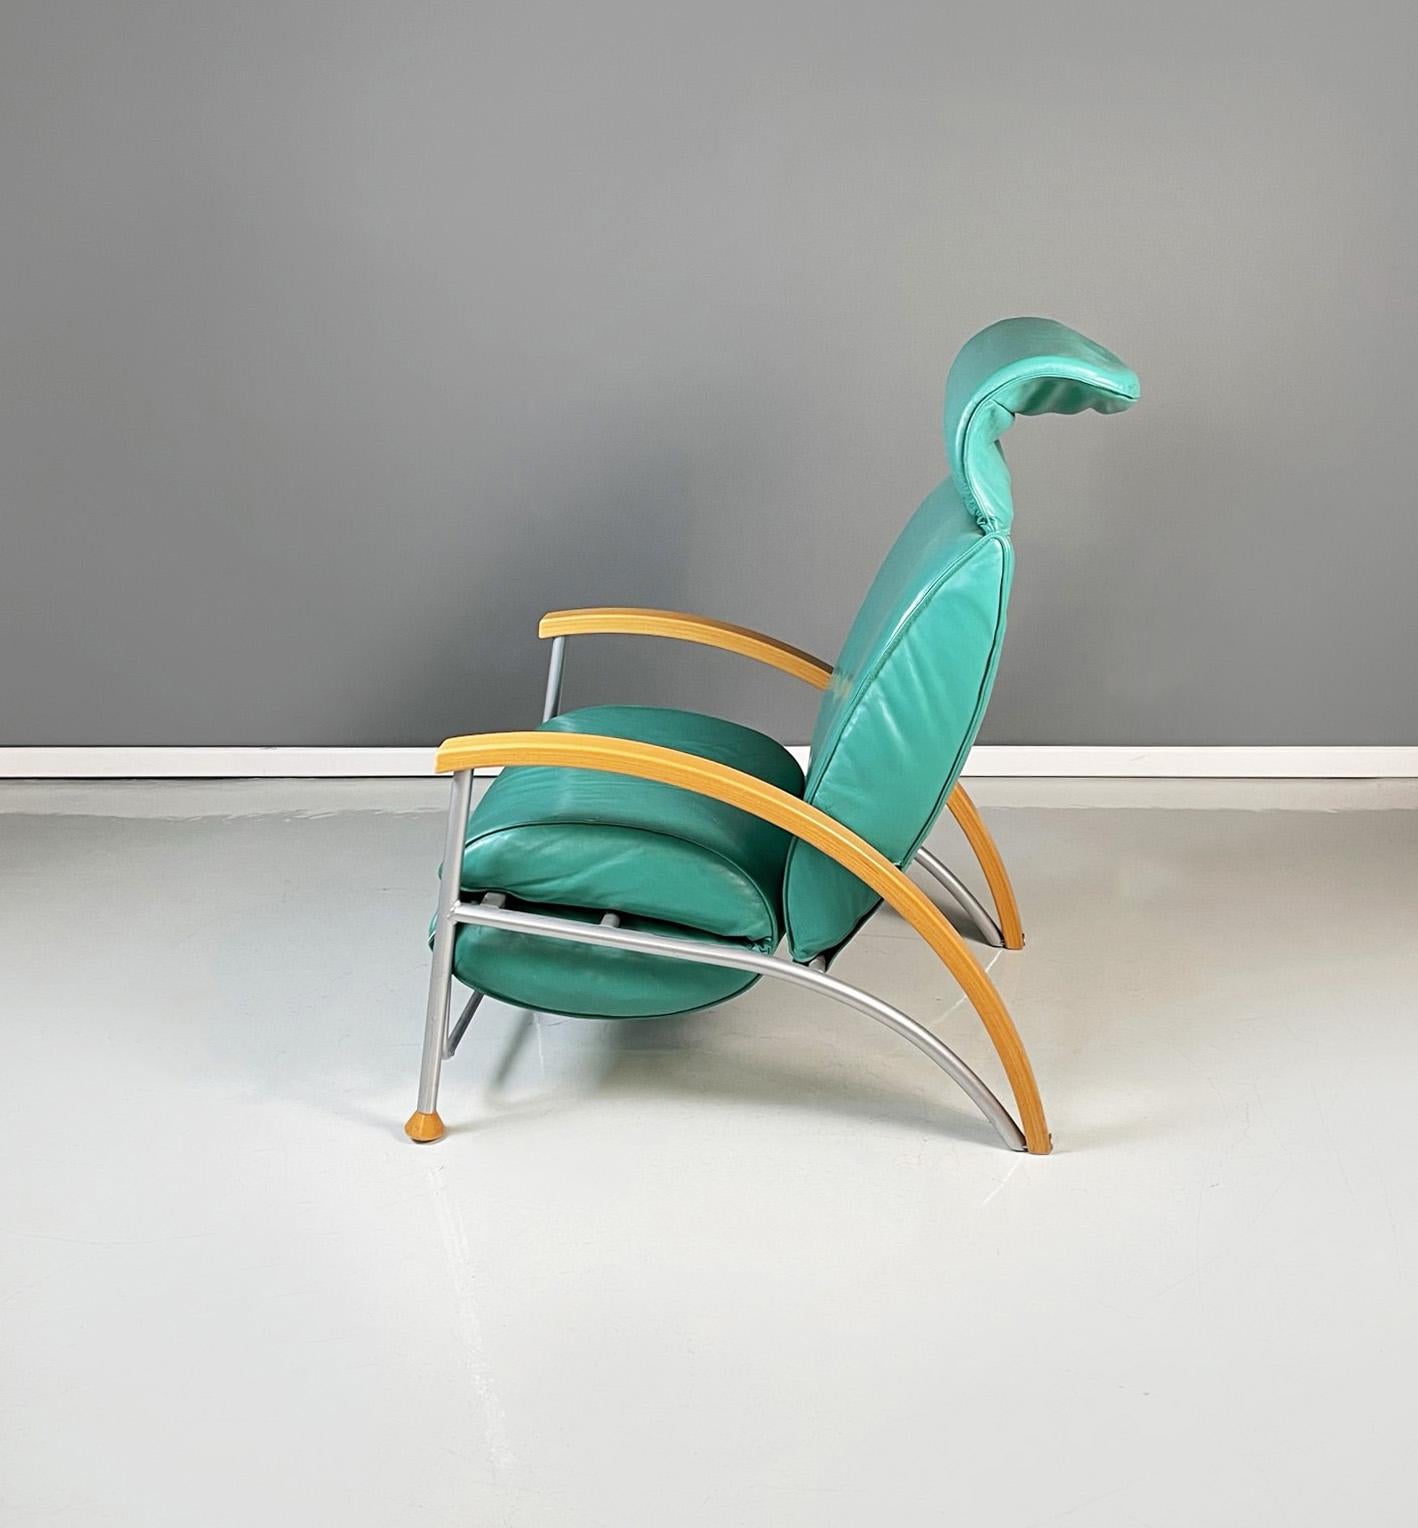 Late 20th Century Italian Modern Armchair in Aqua-Green Leather, Wood and Metal, 1980s For Sale